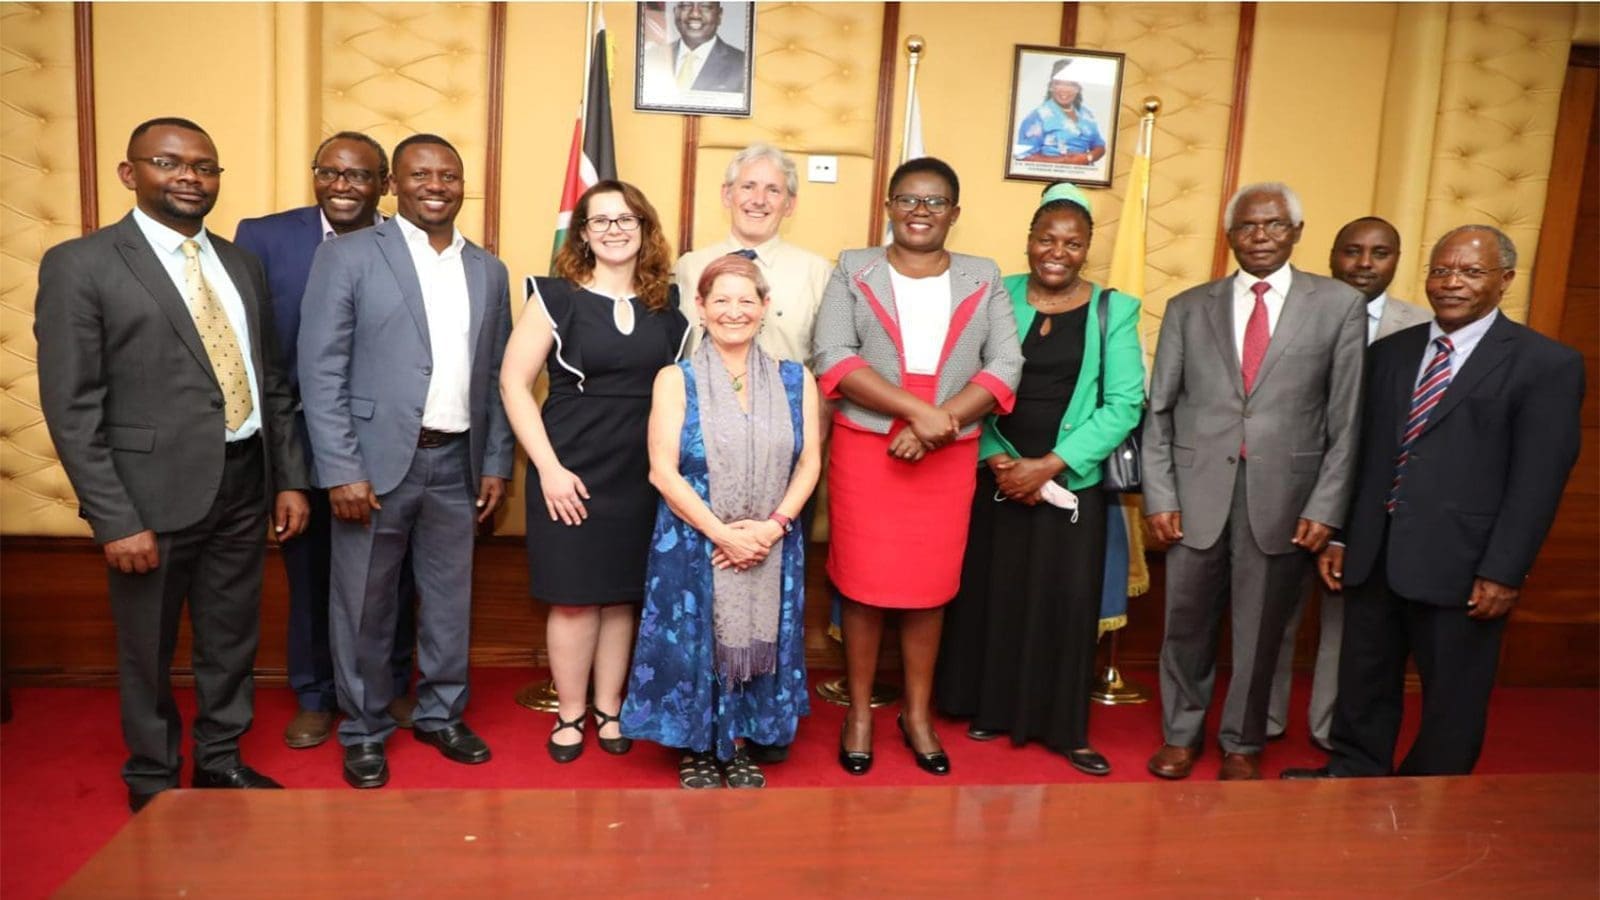 Penn State partners with Meru University to tackle food safety issues